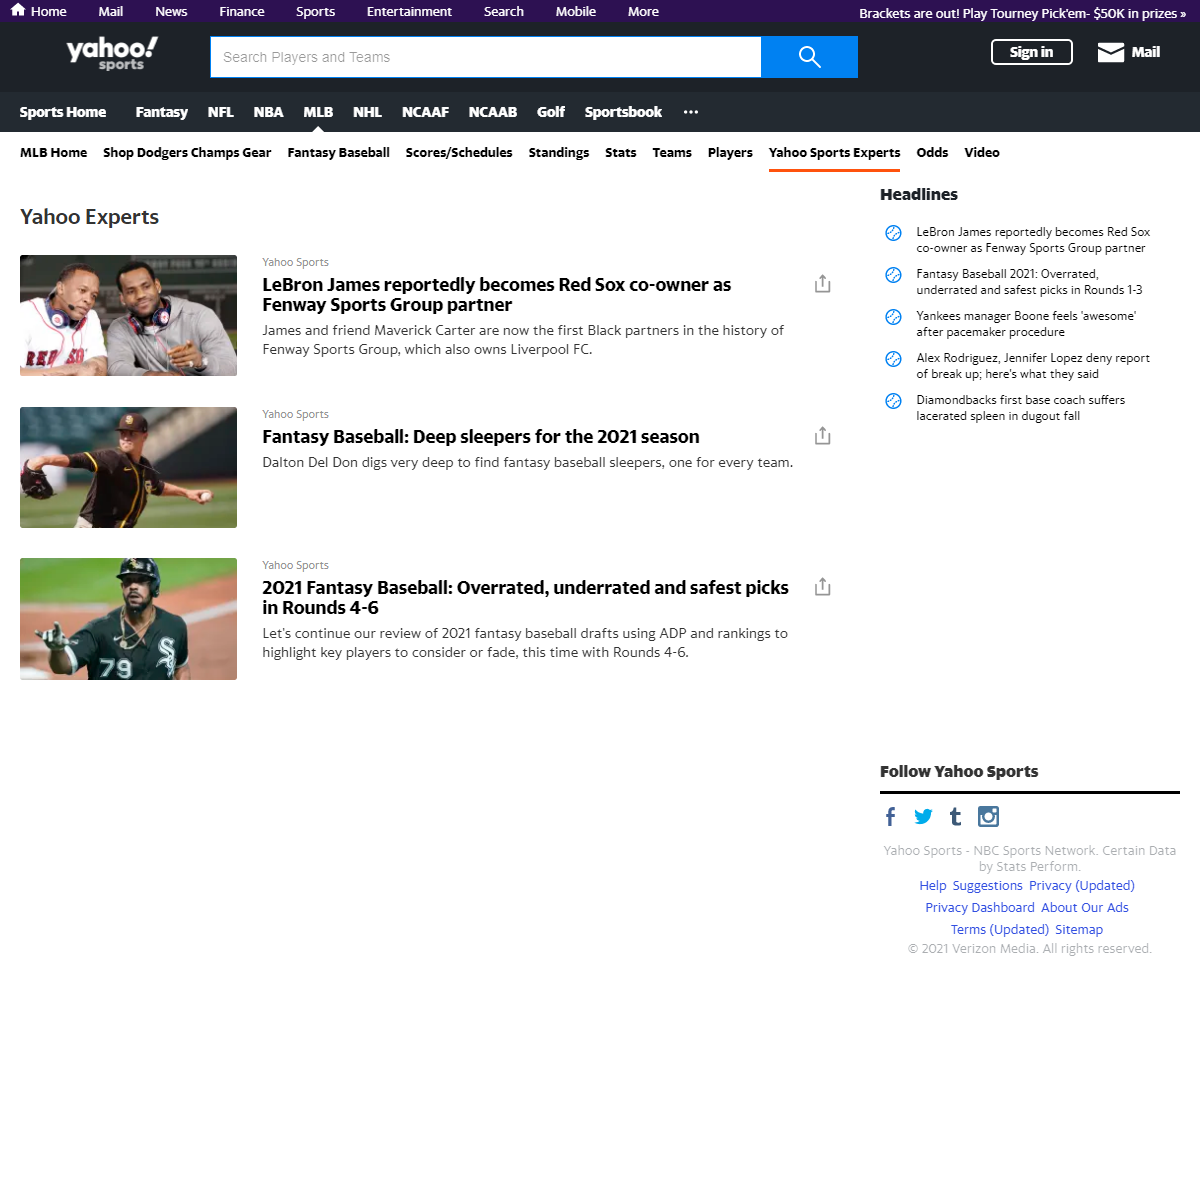 A complete backup of https://sports.yahoo.com/mlb/experts/